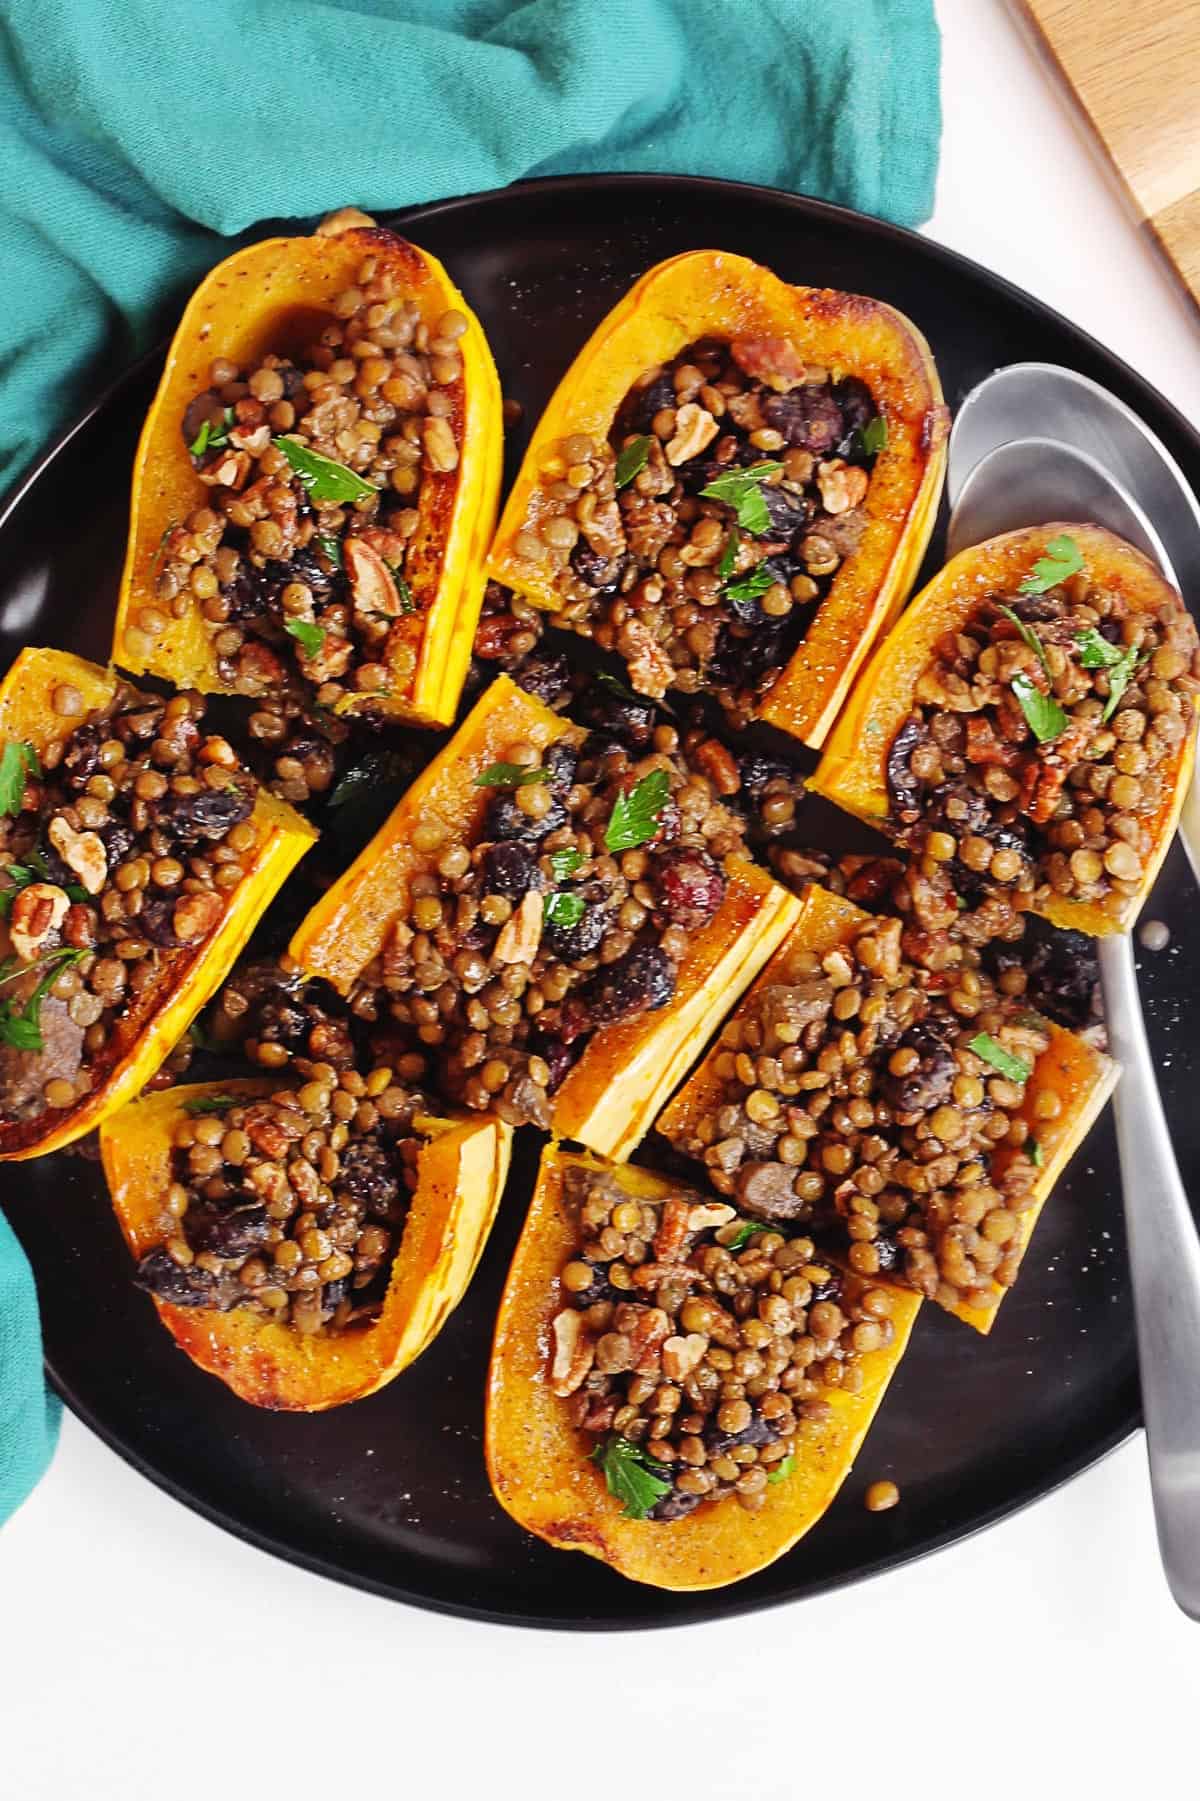 Lentil stuffed delicata squash with silver spoons